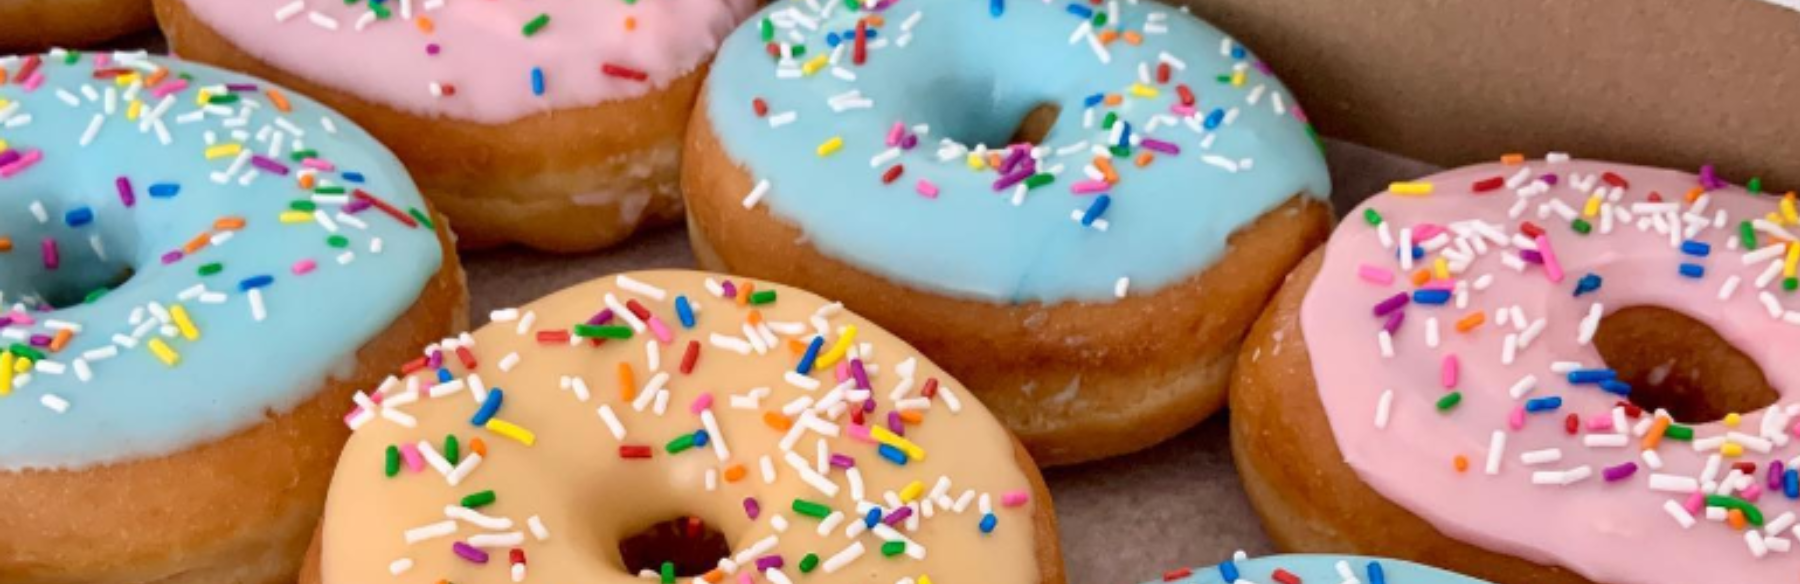 Donuts with pink, blue and orange icing and rainbow sprinkles 